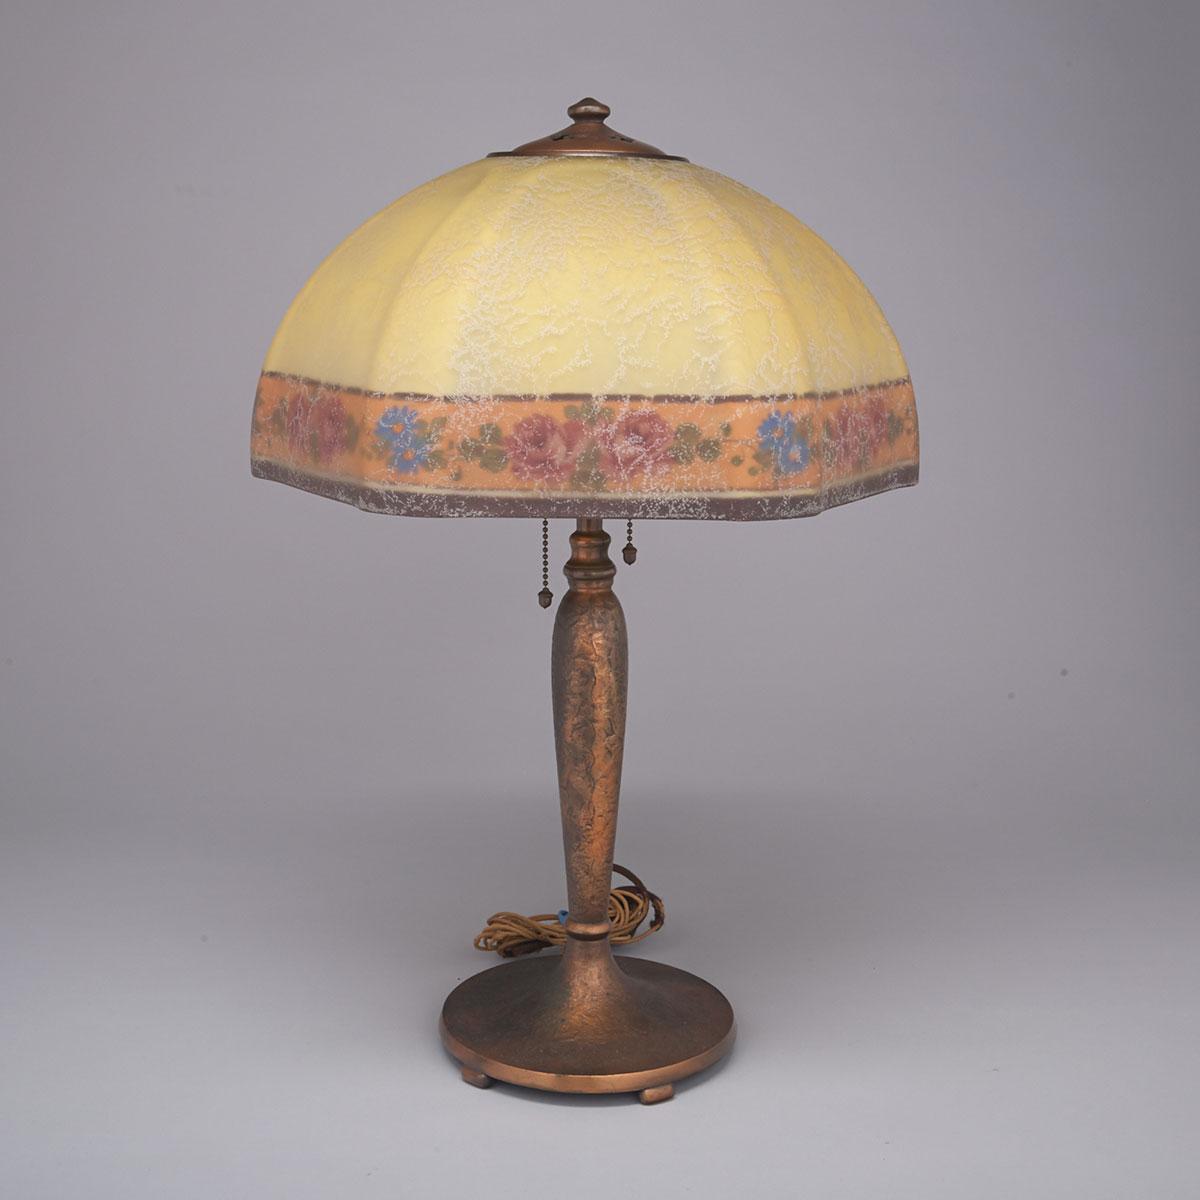 Handel Reverse Painted Glass and Coppered Metal Table Lamp, c.1922